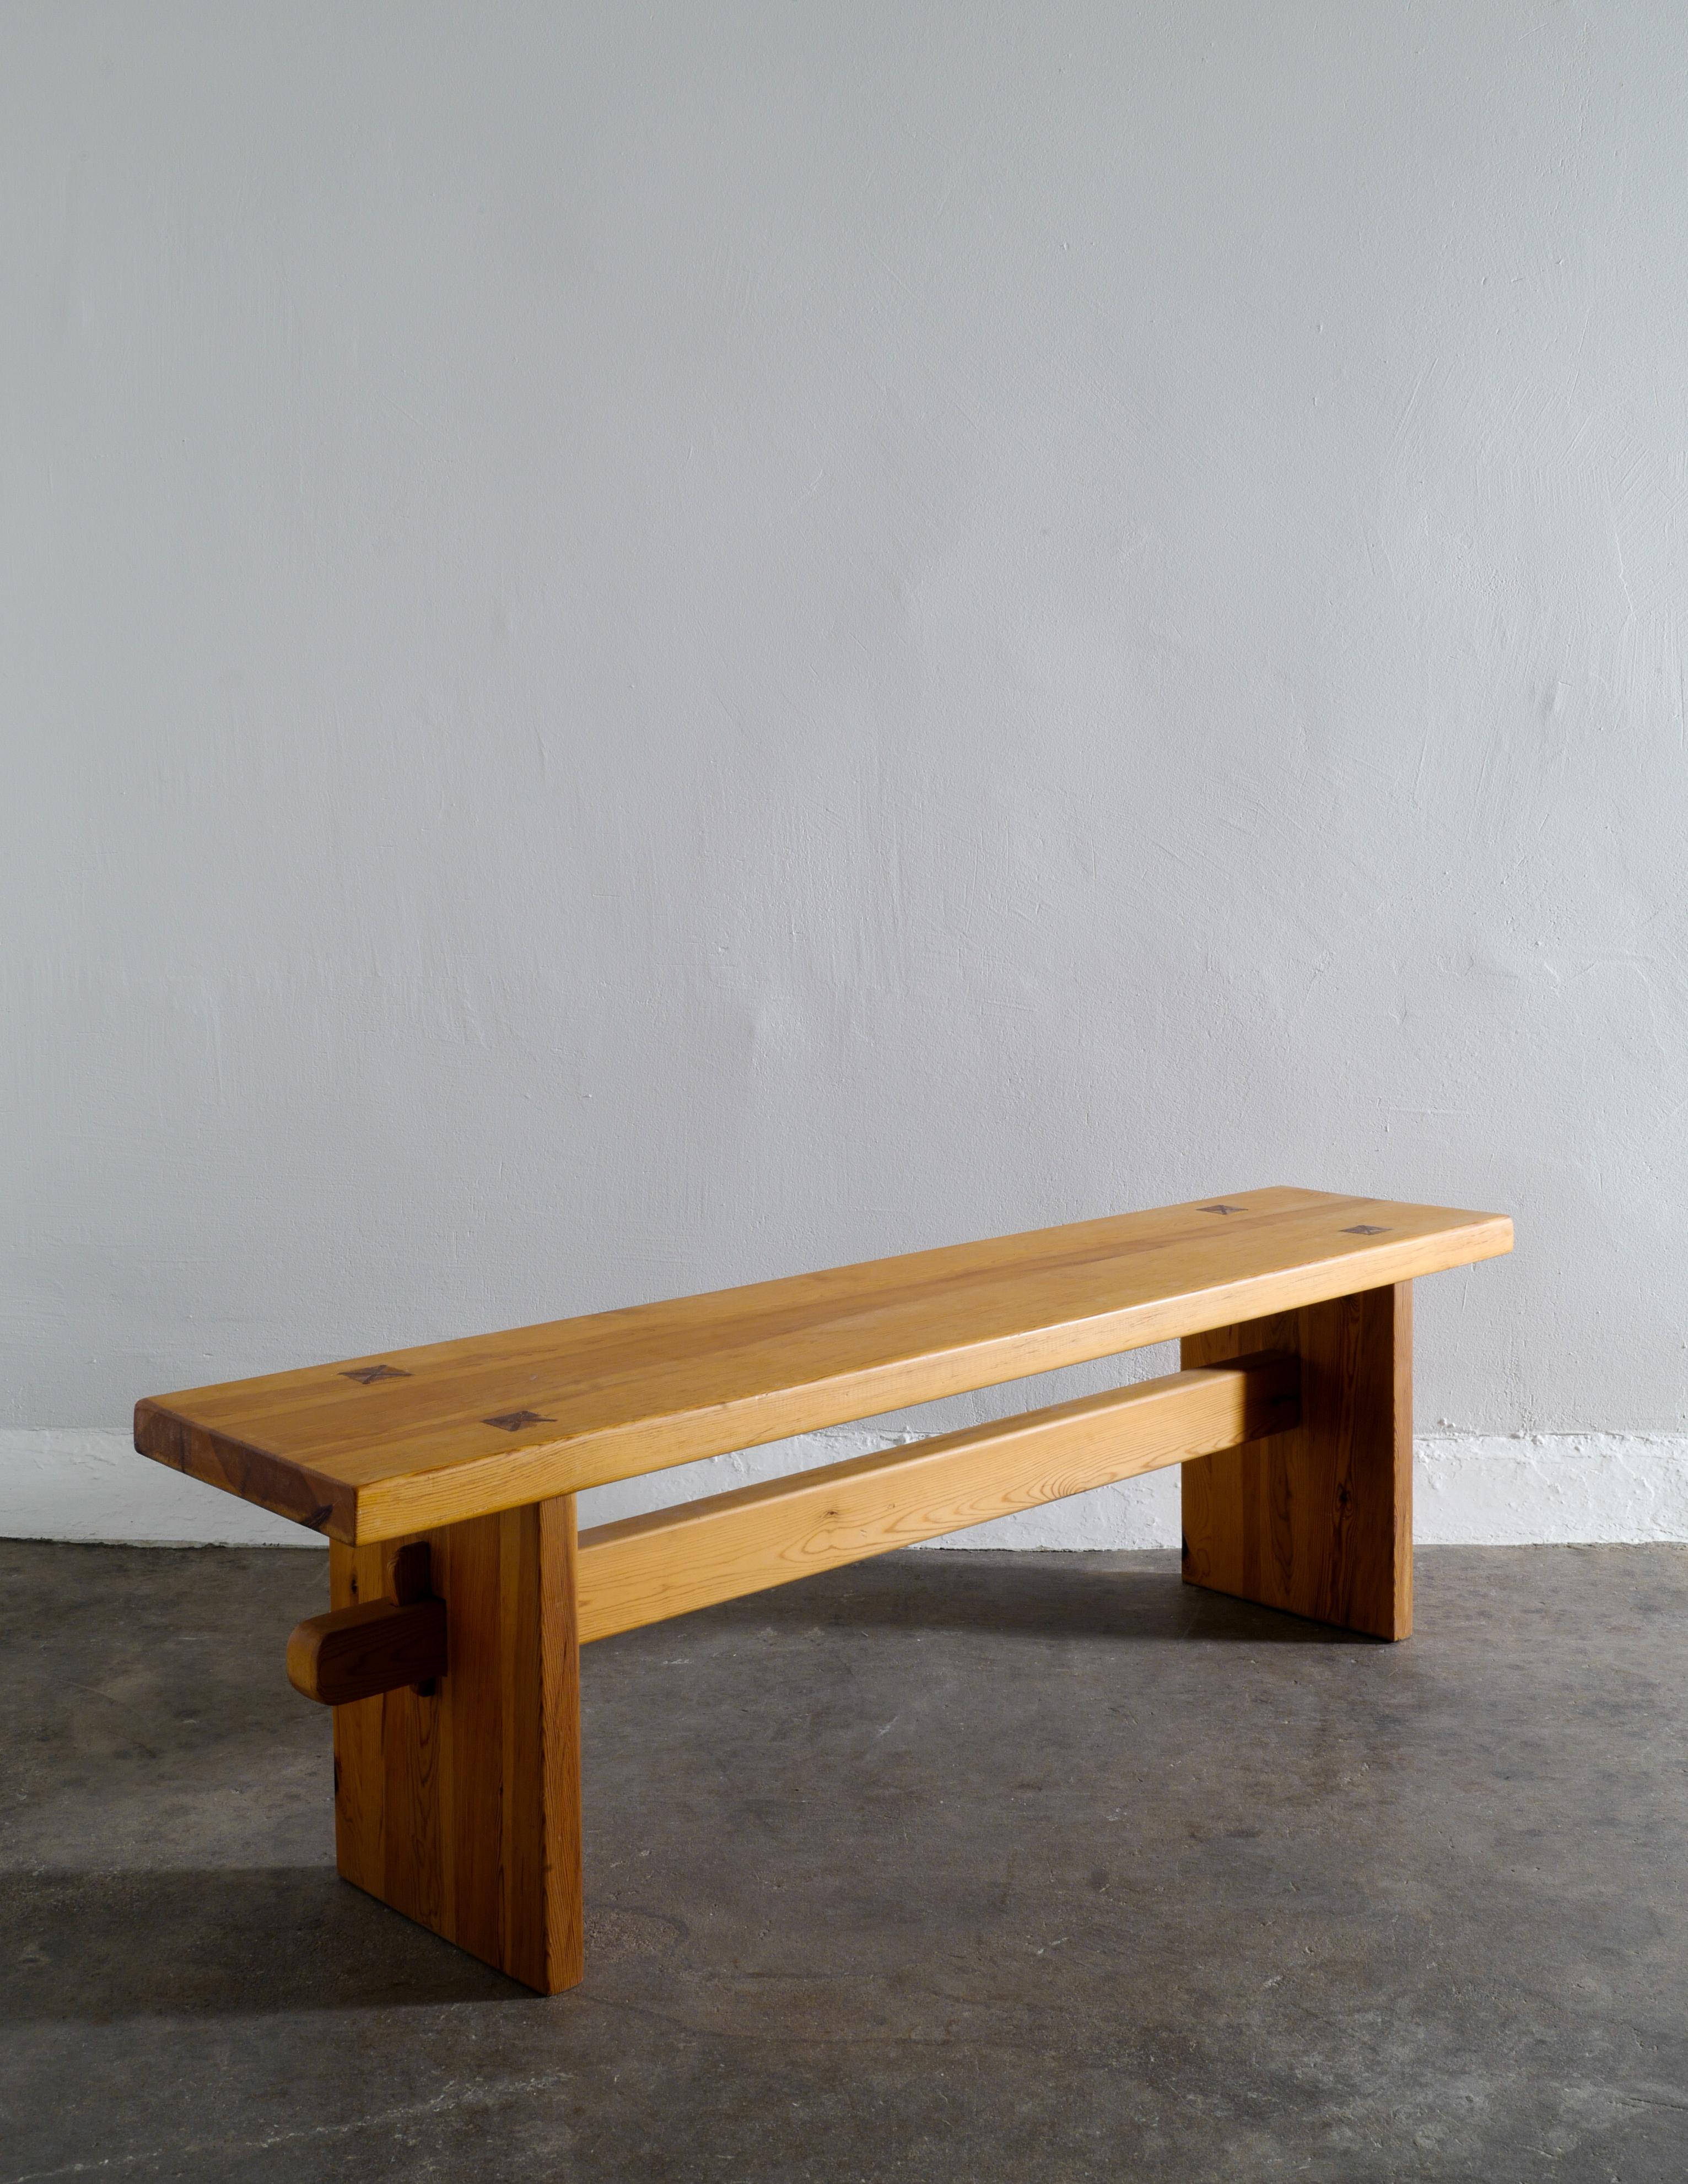 Late 20th Century Swedish Pine Bench Produced in the 1970s